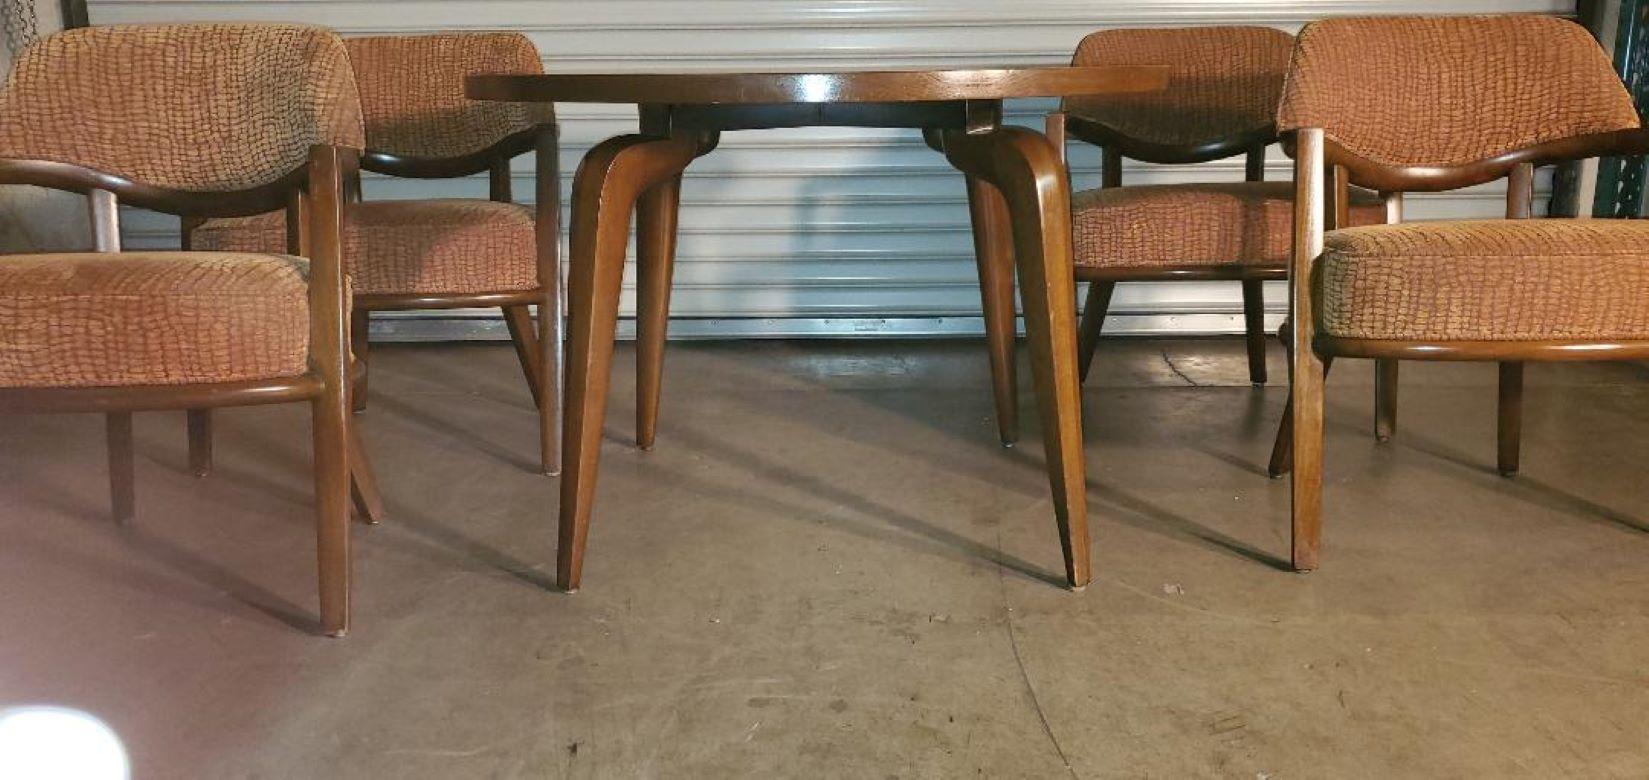 RARE 1950s Maurice Bailey Monteverdi Young Card Table & 4 Maurice Bailey Chairs In Good Condition For Sale In Monrovia, CA